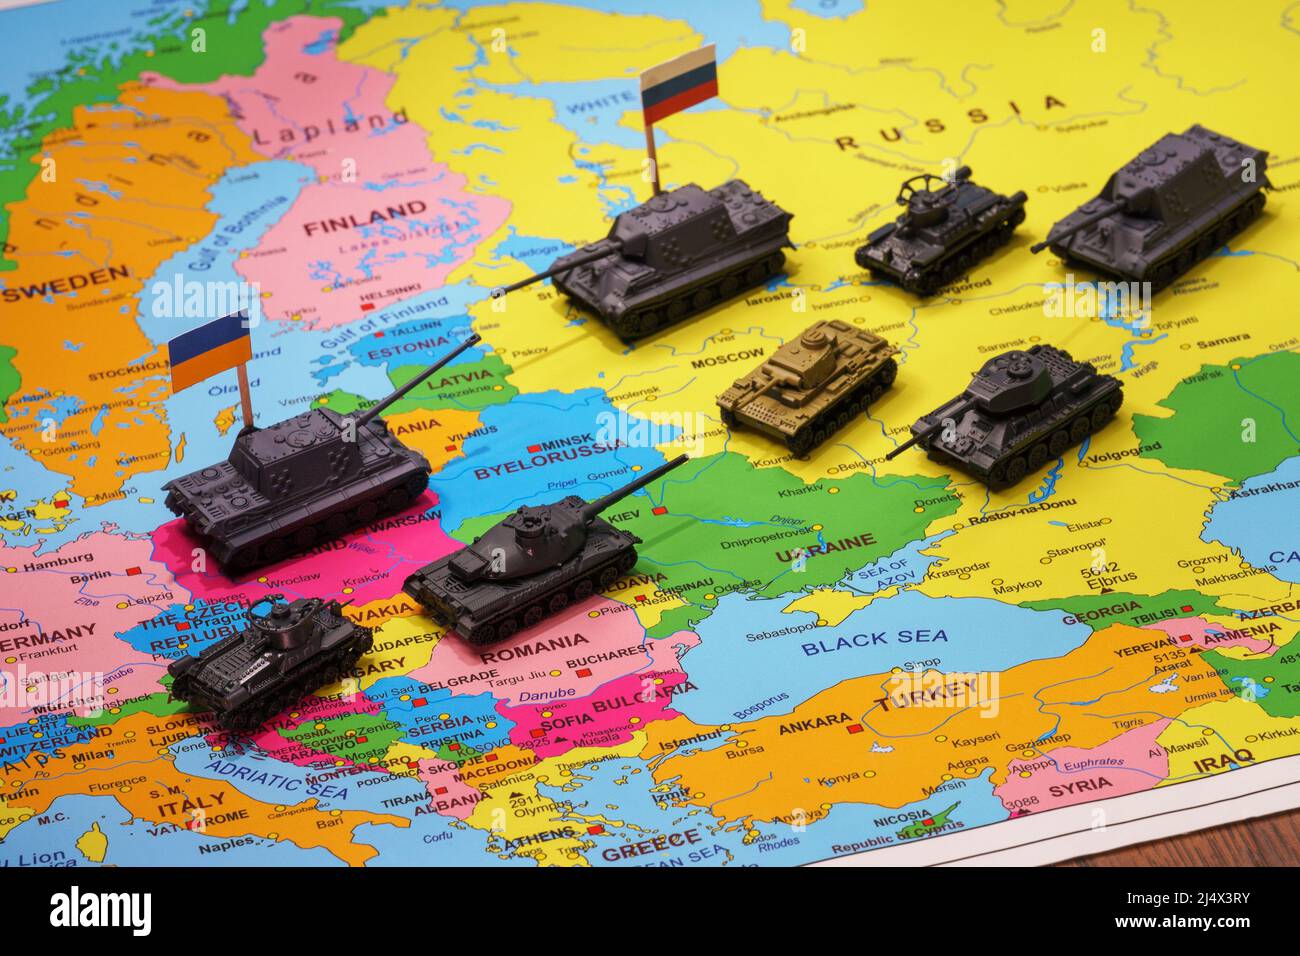 Armed conflict between Russia and Ukraine on the map of Europe. Stock Photo